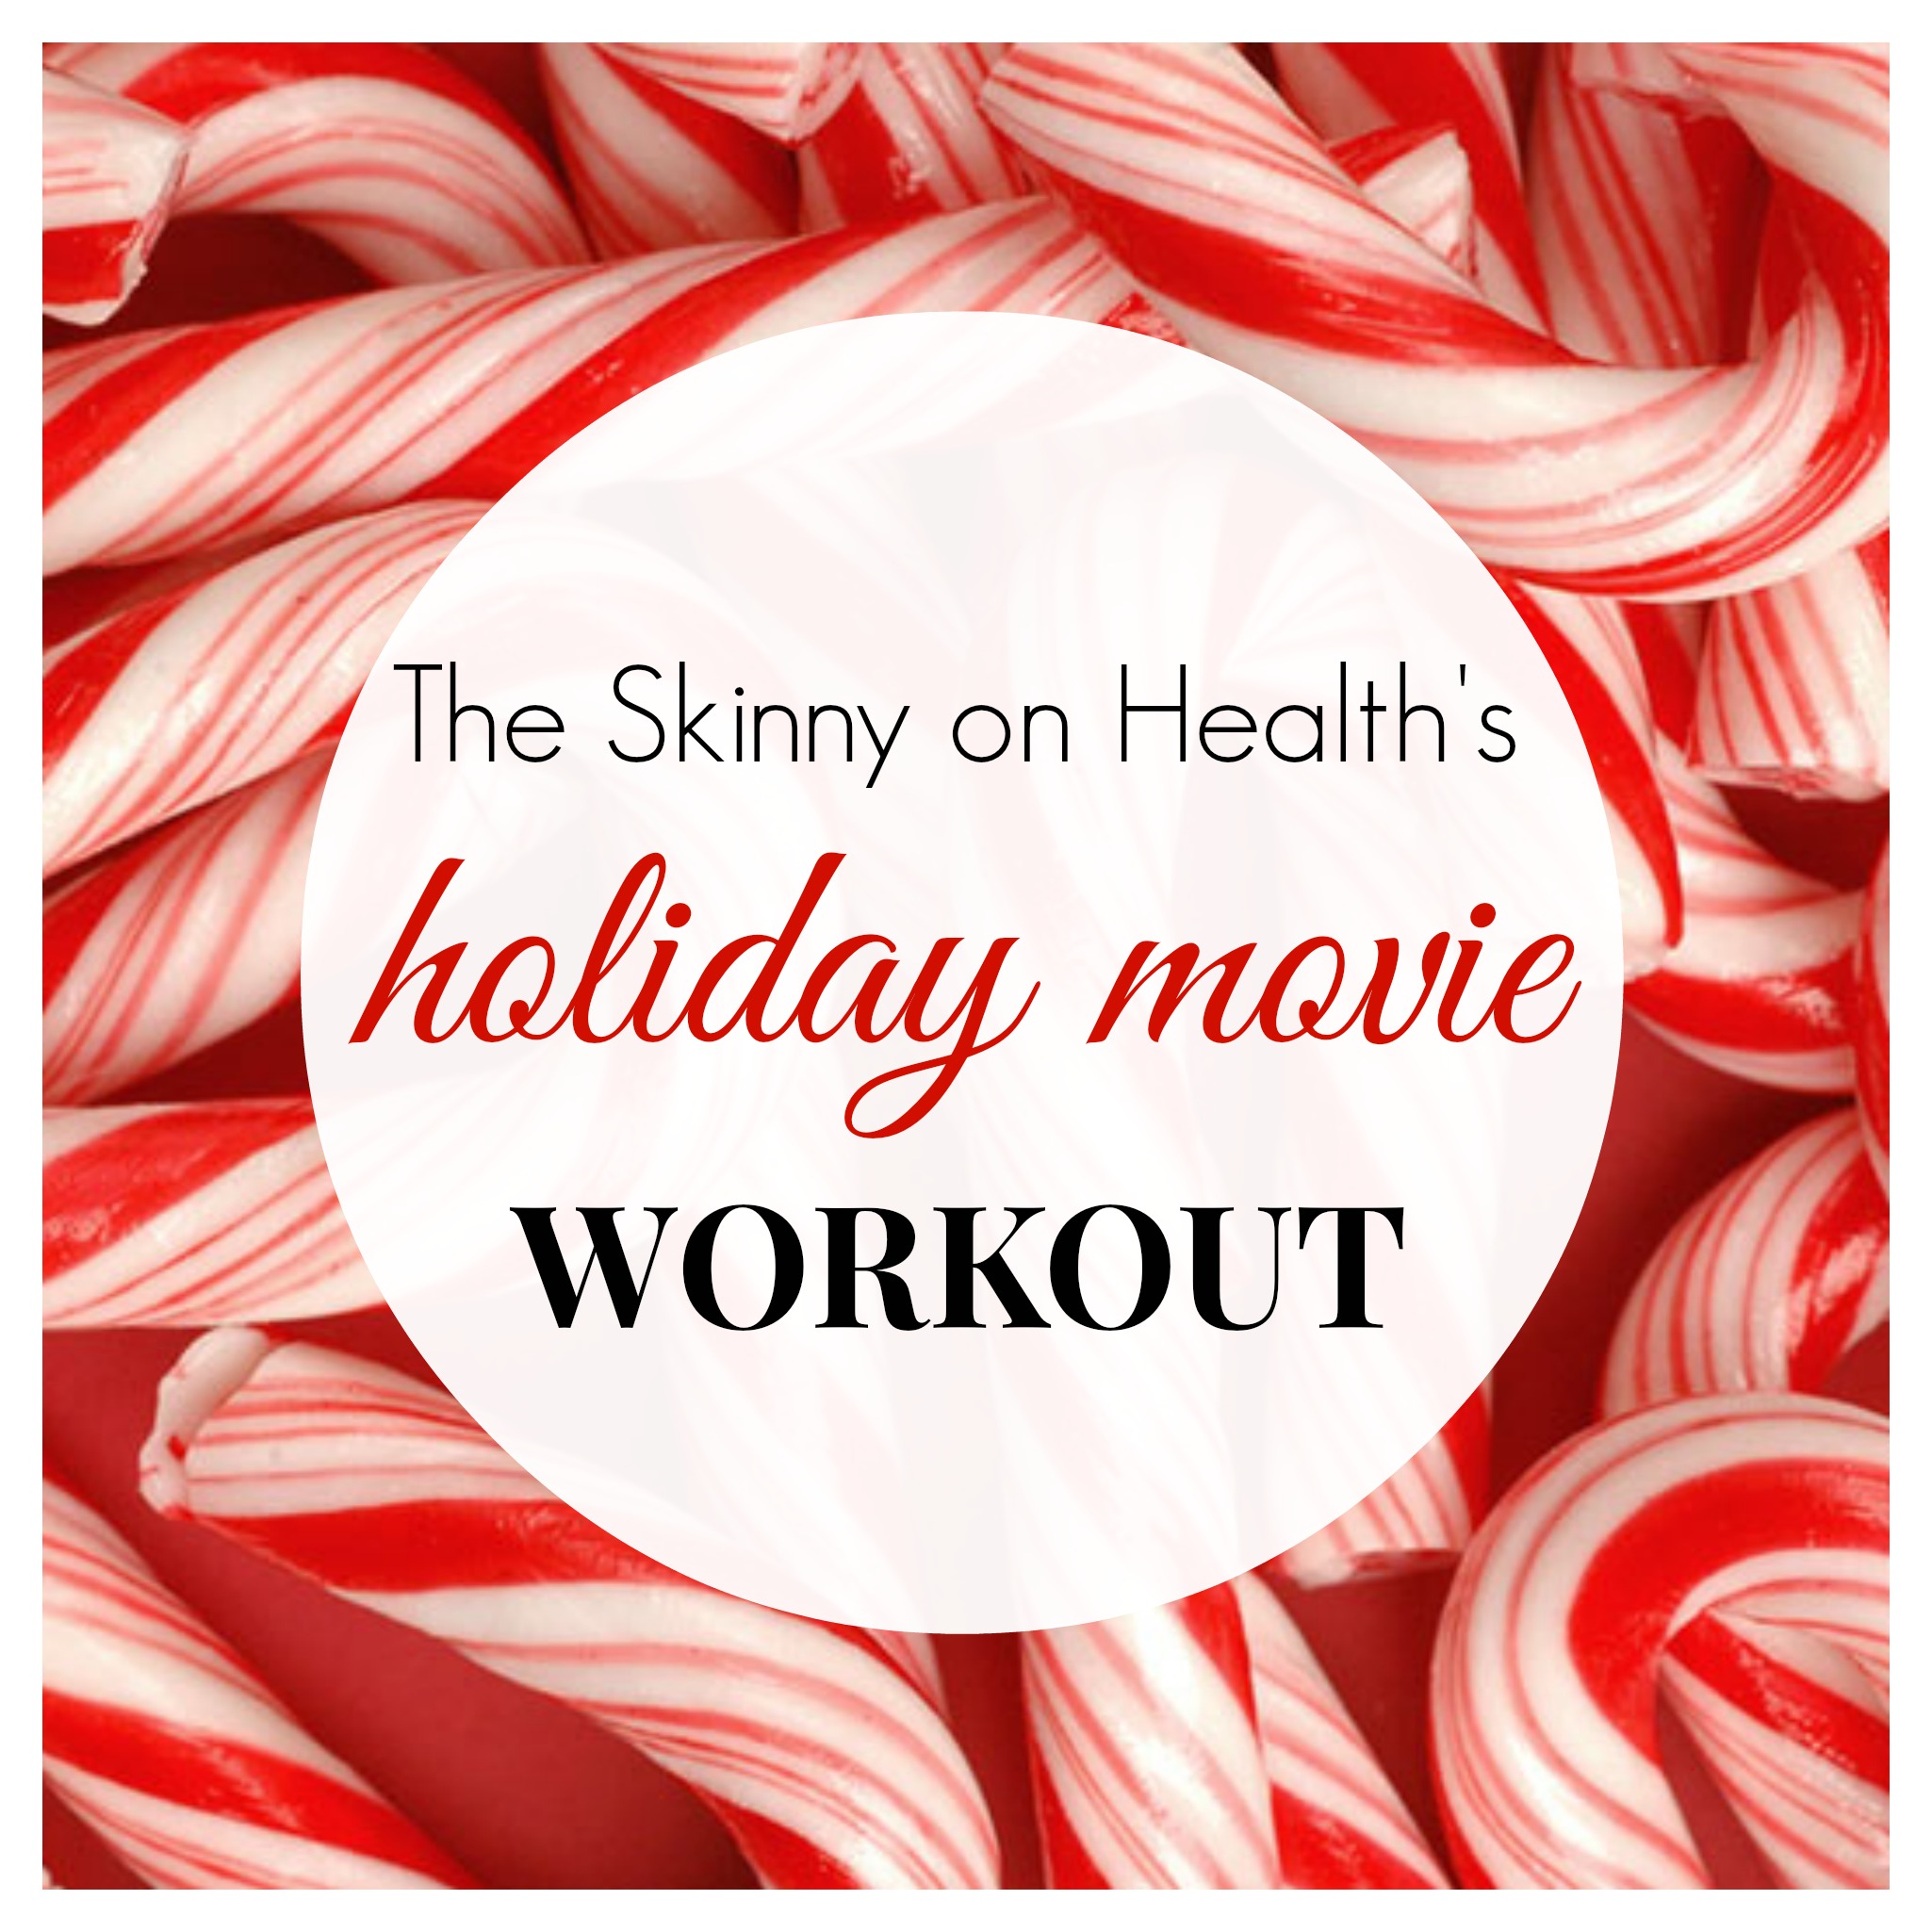 holiday movie workout